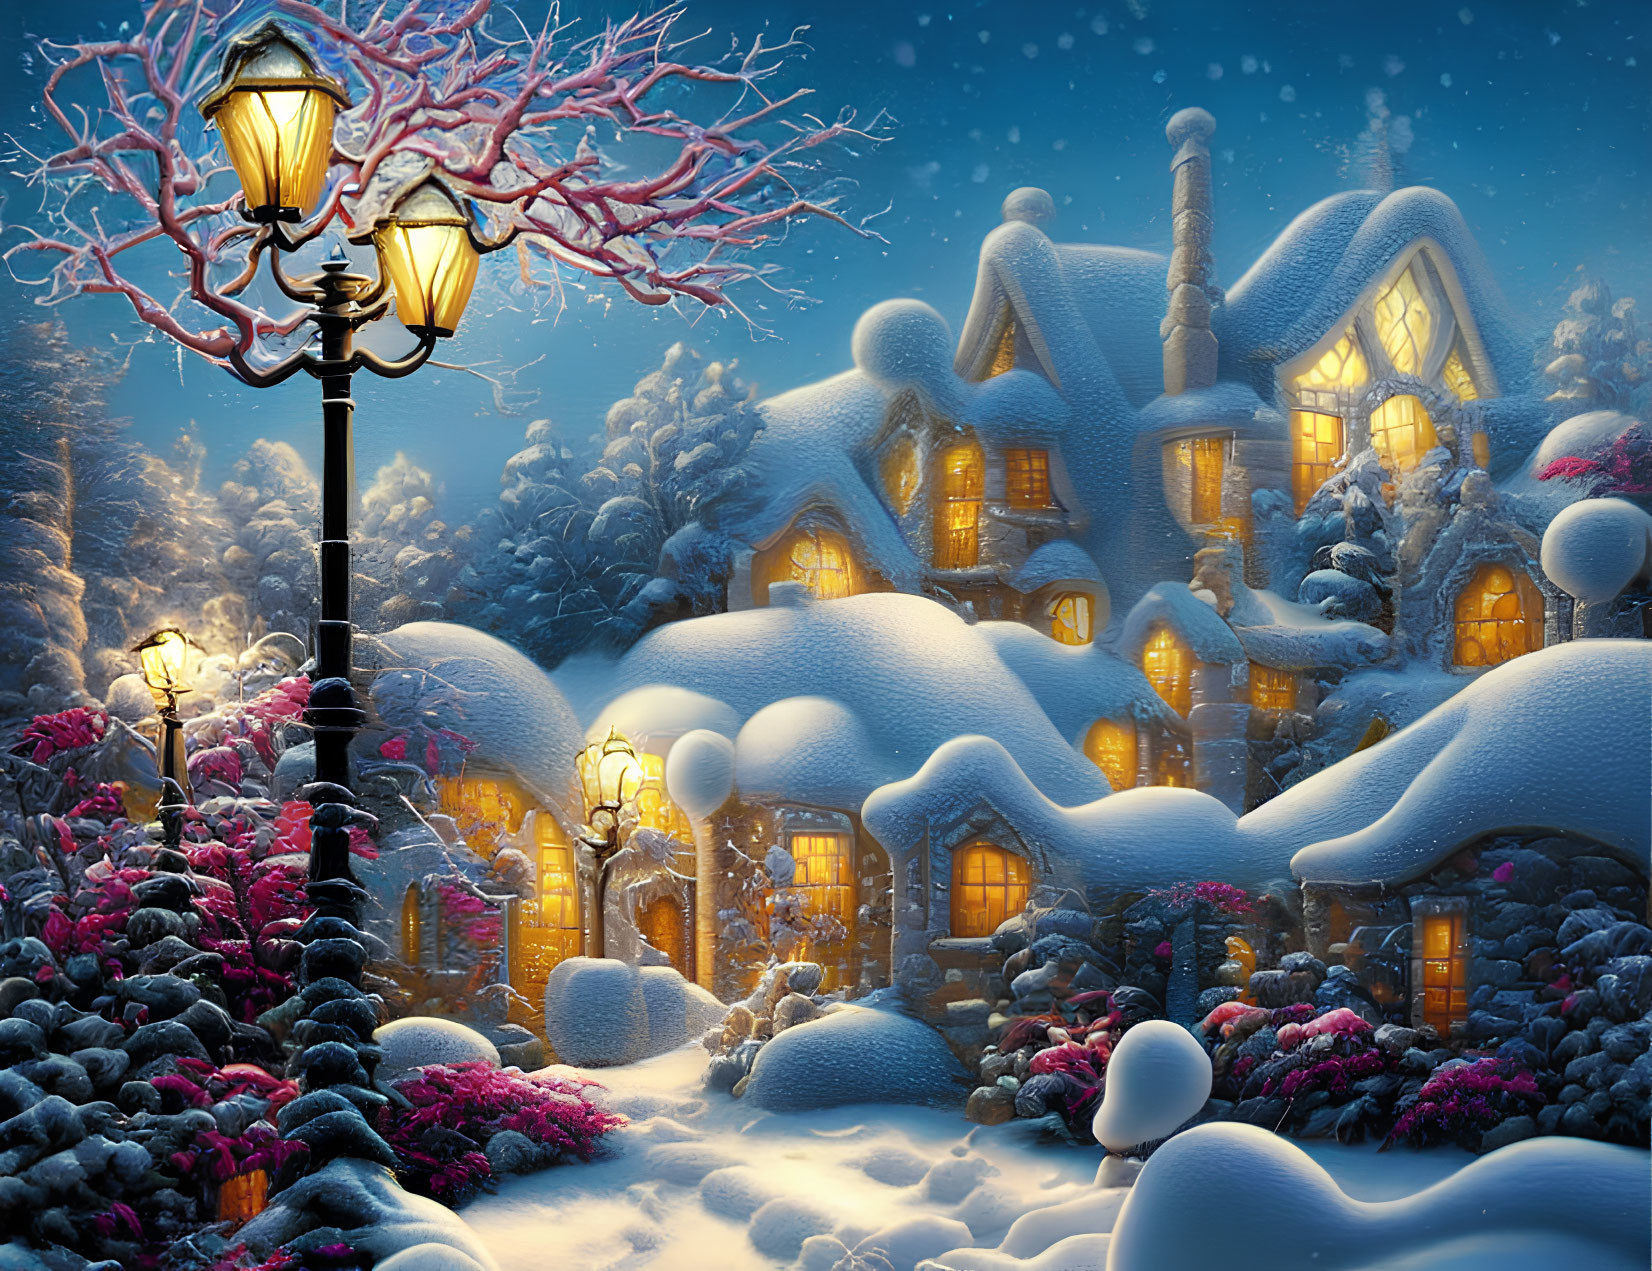 Snow-covered cottage with glowing windows amidst snowy trees and lit lamppost.